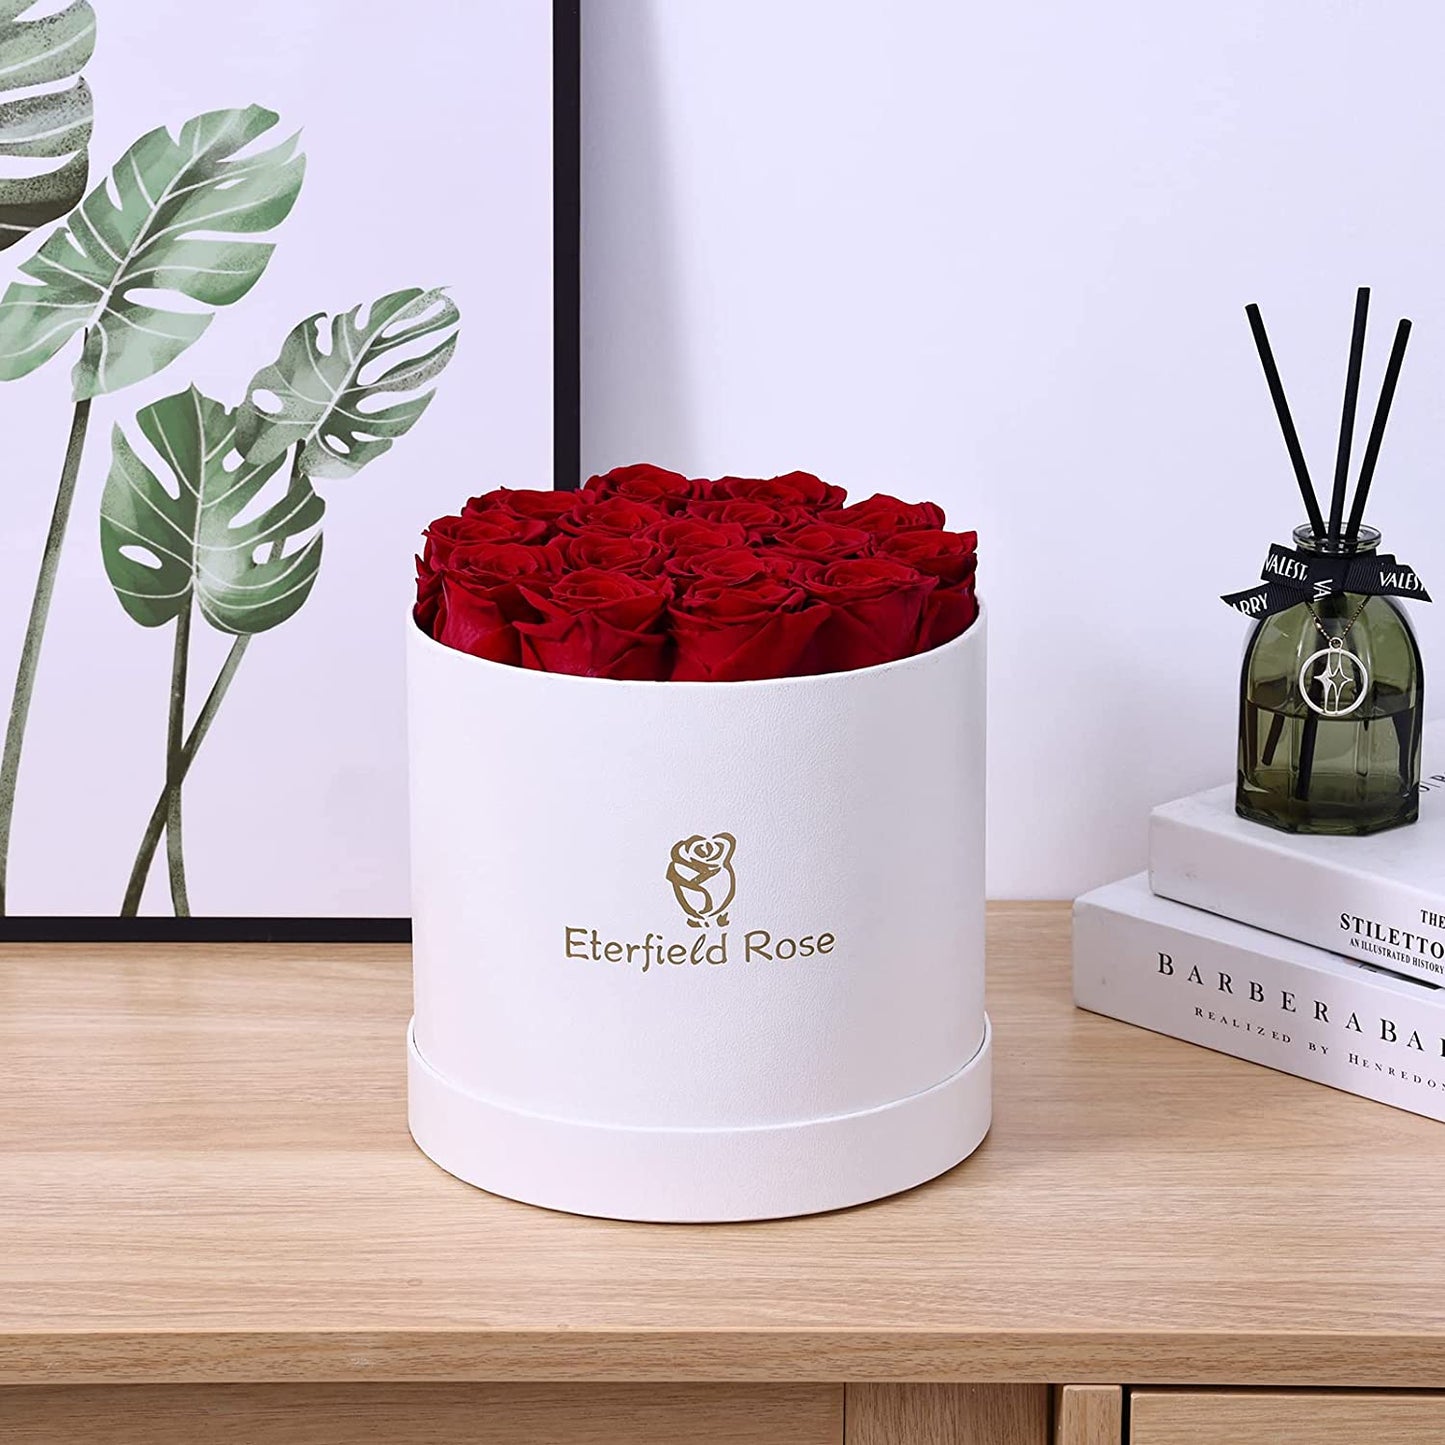 16-Piece Forever Flowers Preserved Rose in a Box Real Roses That Last a Year Preserved Flowers for Delivery Prime Mothers Day Valentines Day Christmas Day (Red Roses, round White Box)